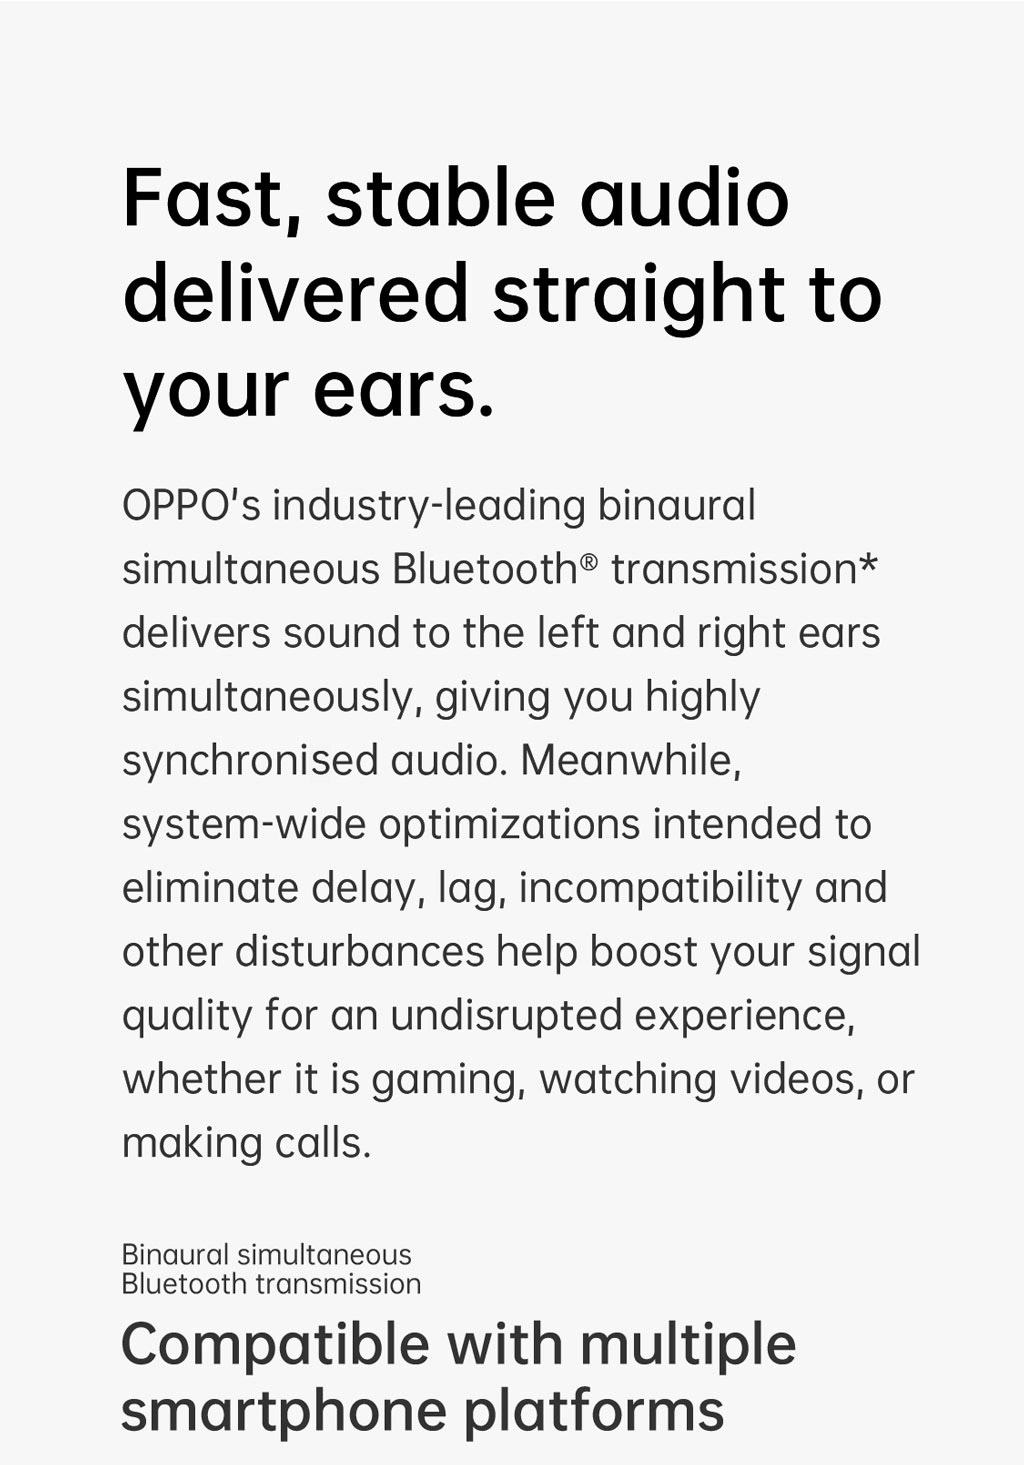 OPPO's Industry-Leading Binaural Simutaneous Bluetooth Transmission